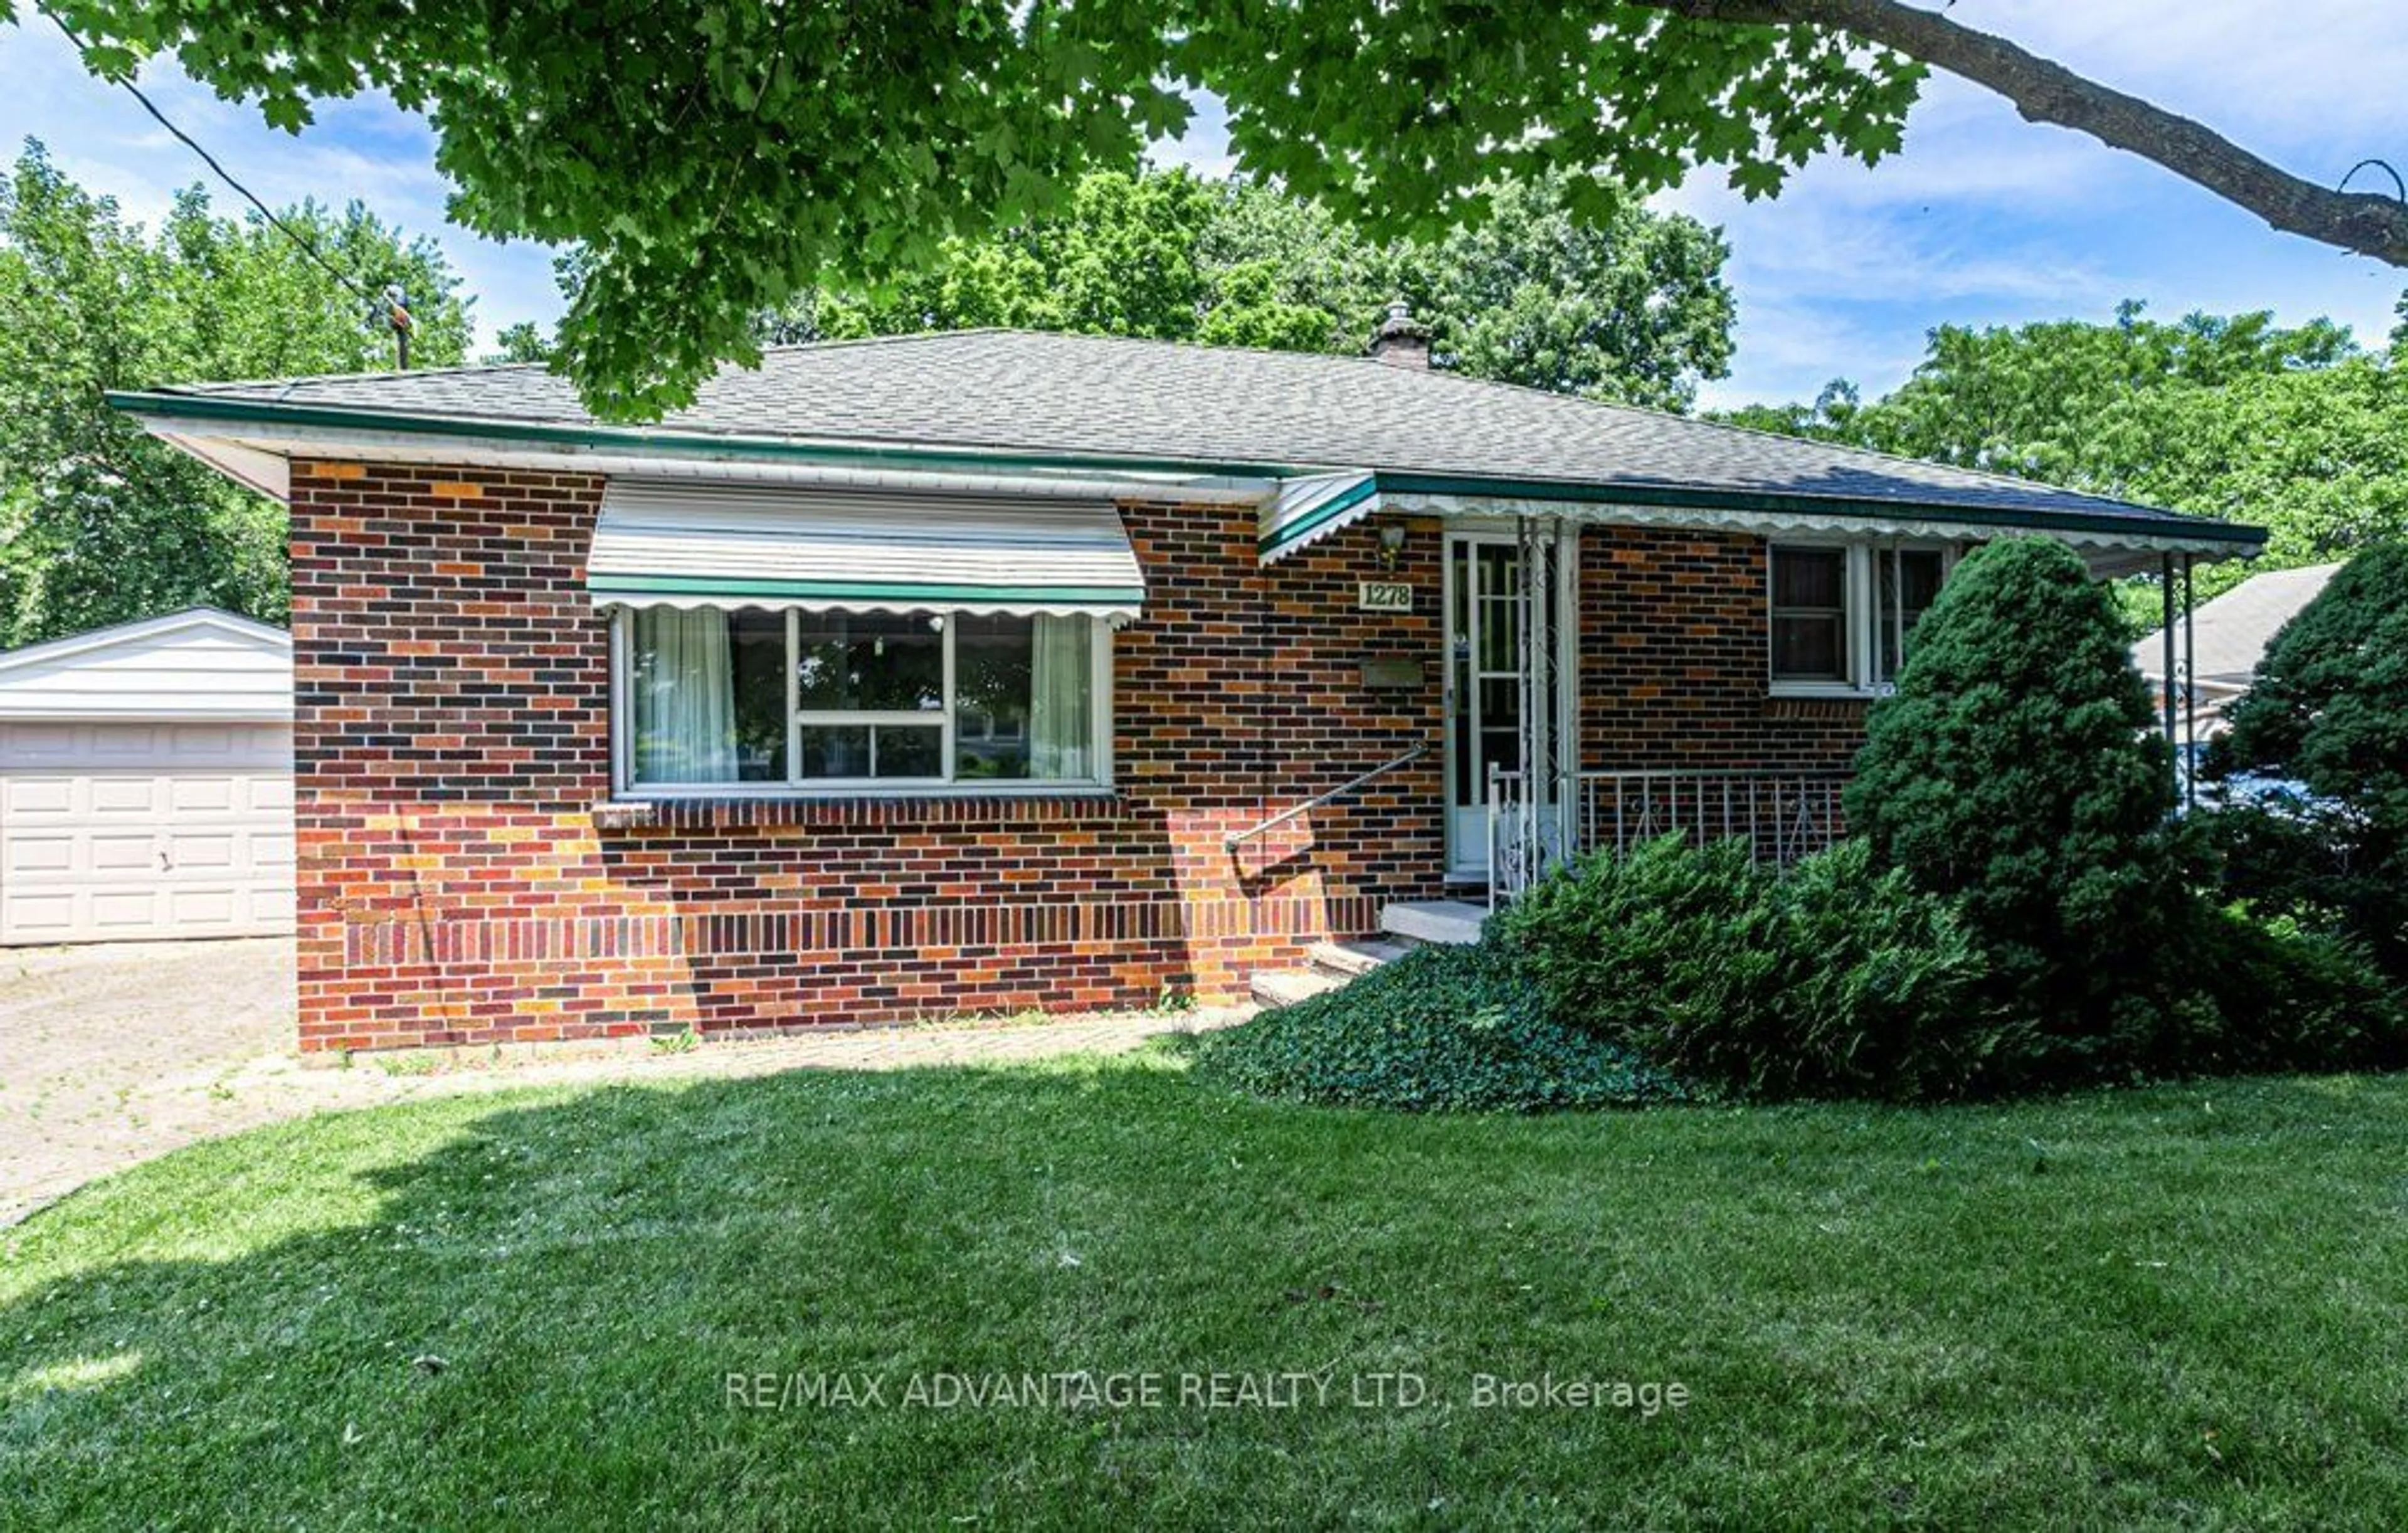 Home with brick exterior material for 1278 Hillcrest Ave, London Ontario N5Y 4N4